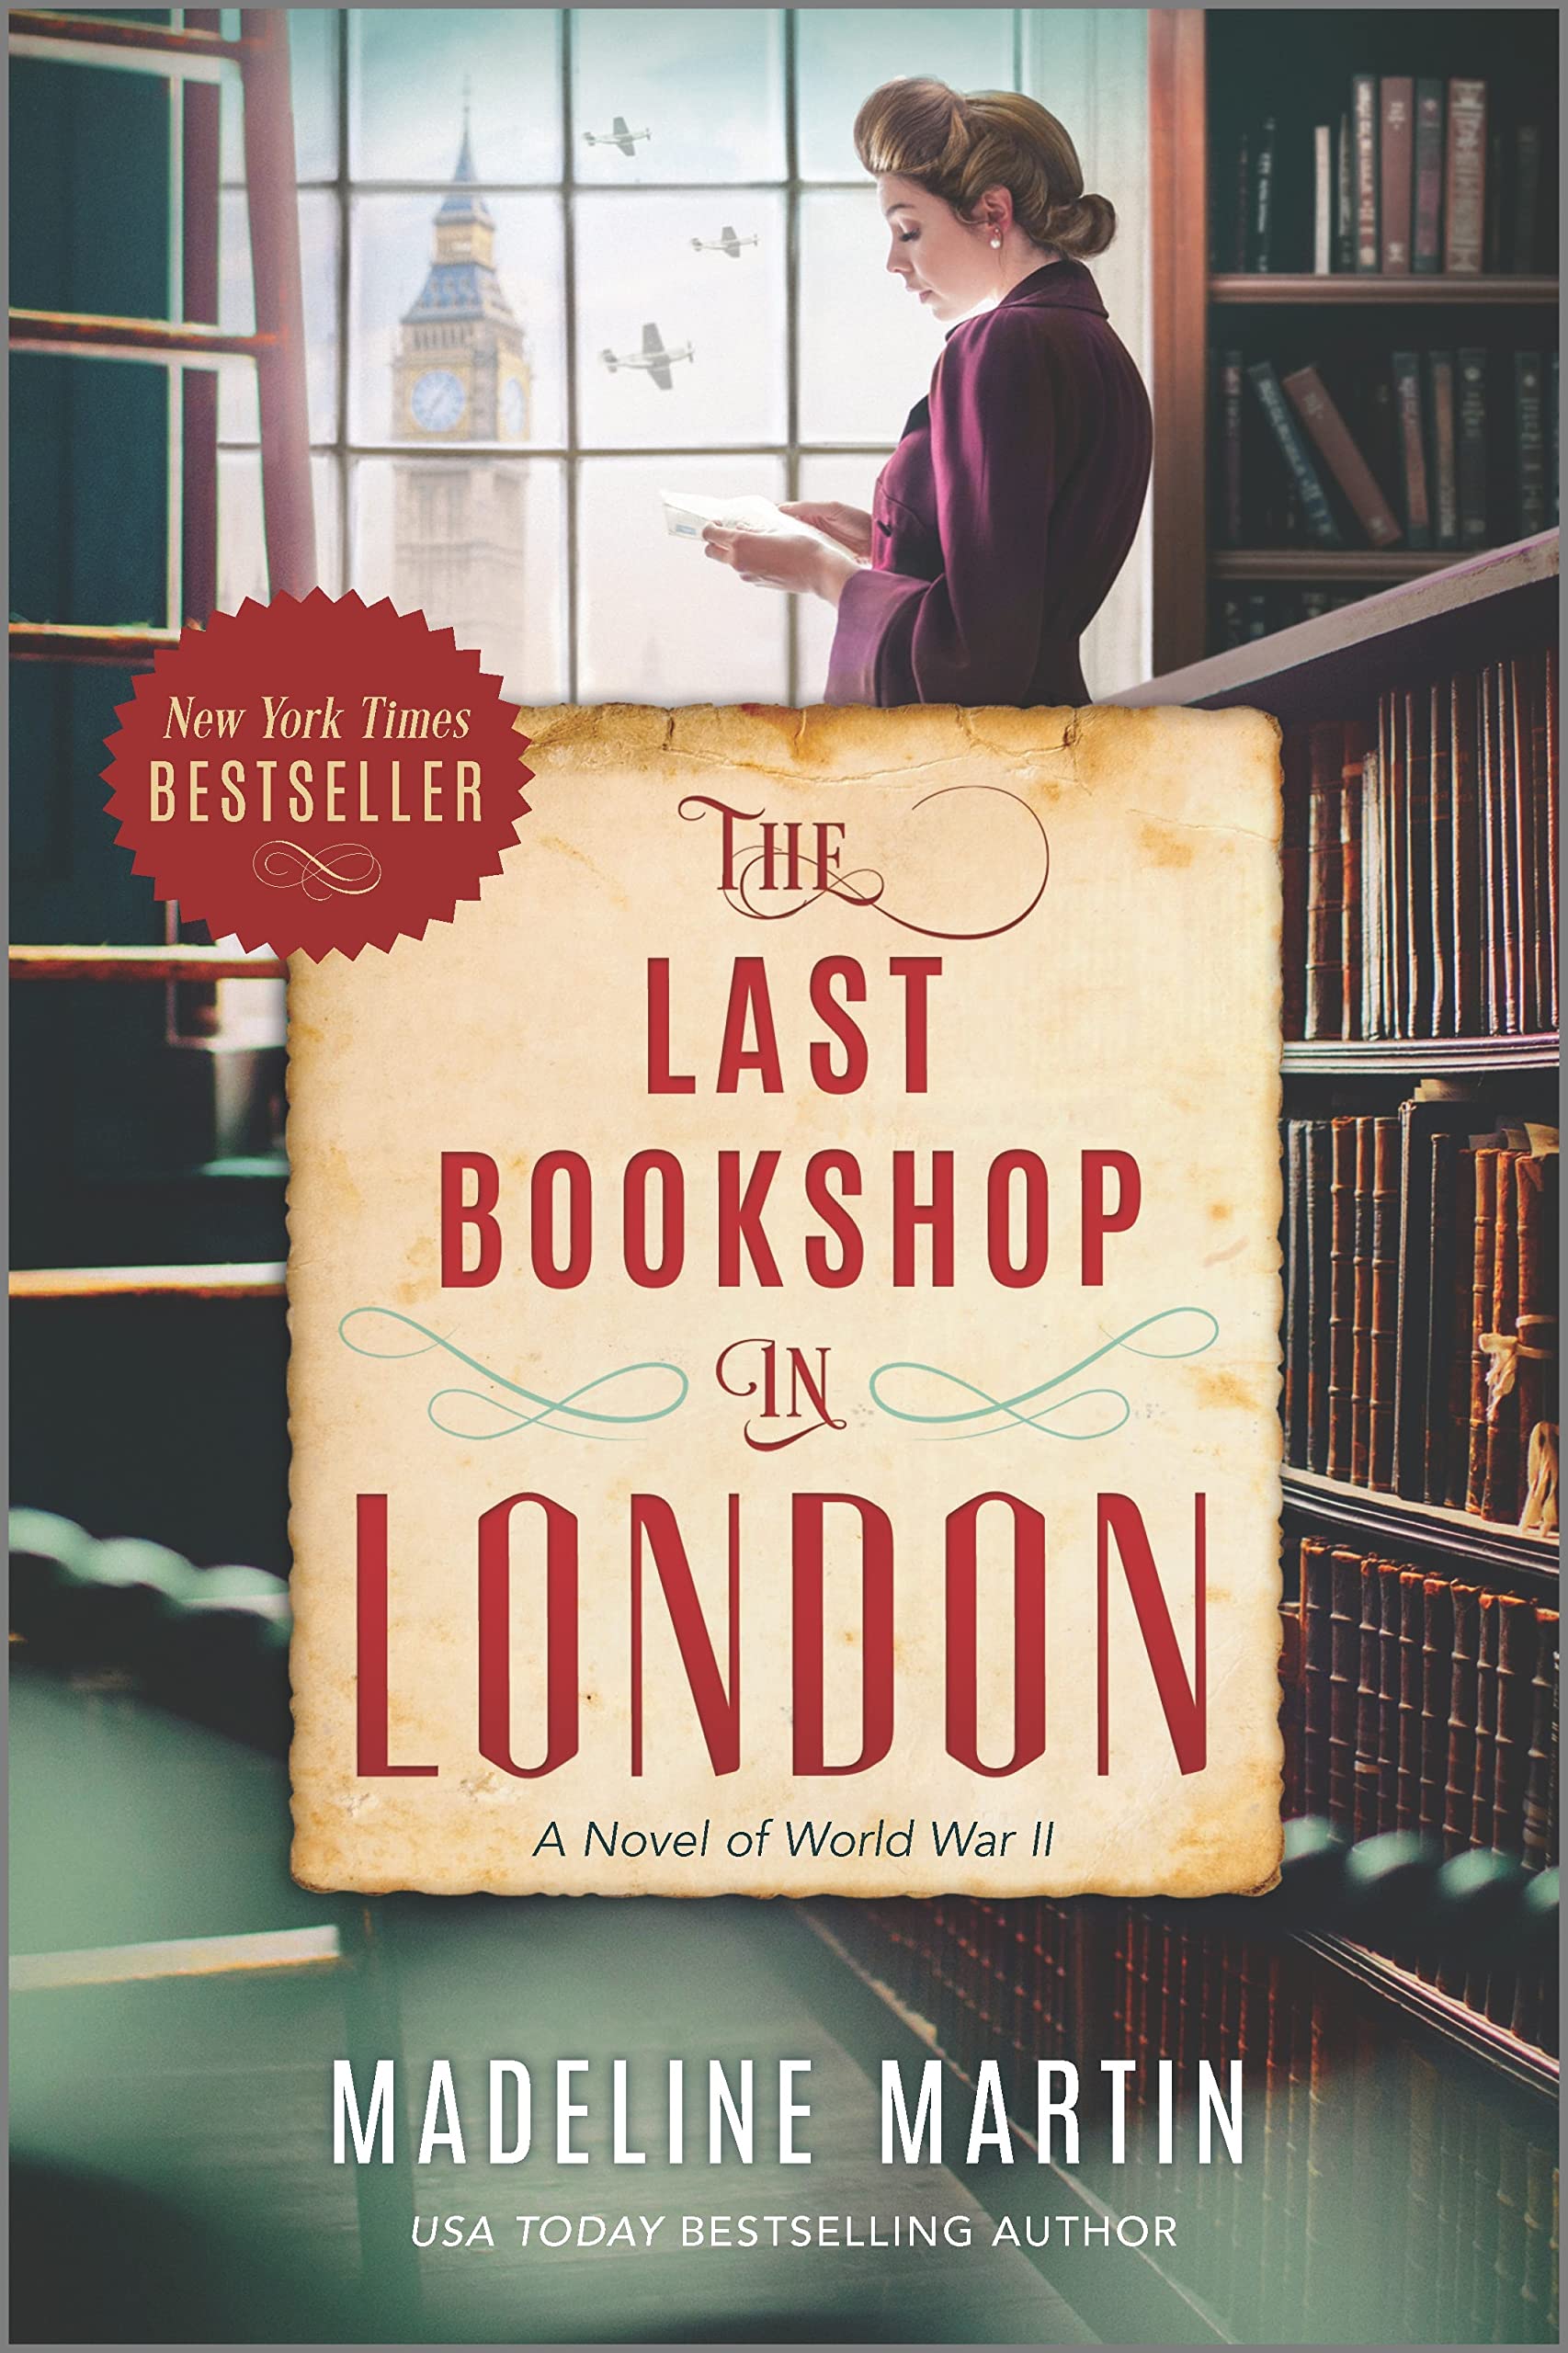 Cover of "The Last Bookshop in London: A Novel of World War II by Madeline Martin"